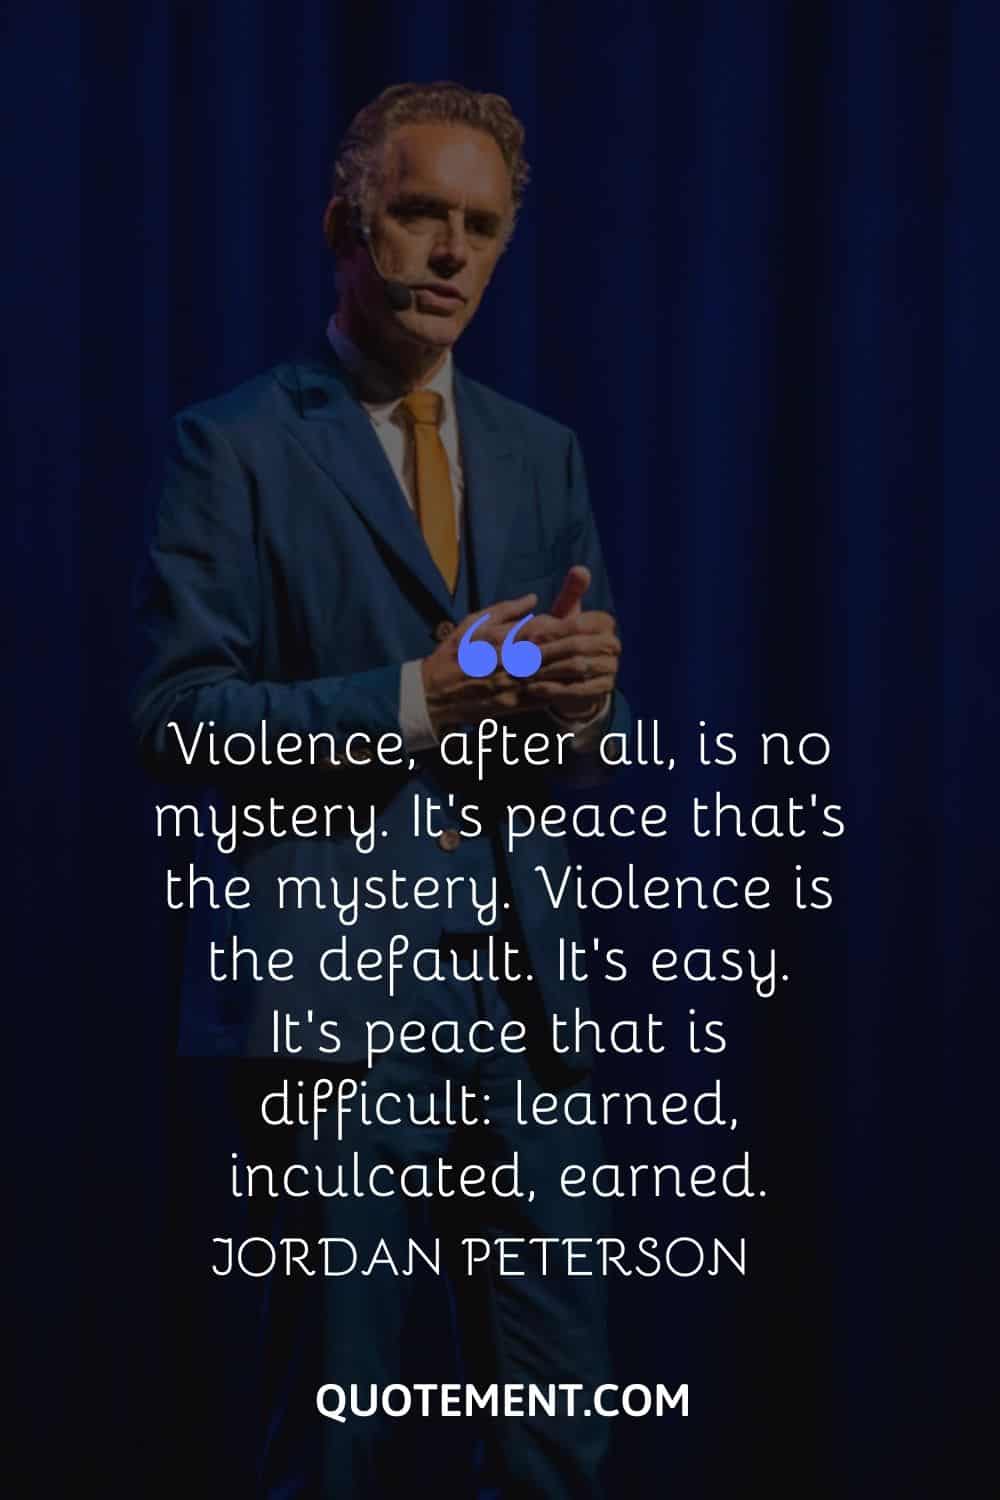 “Violence, after all, is no mystery. It’s peace that’s the mystery. Violence is the default. It’s easy. It’s peace that is difficult learned, inculcated, earned.” — Jordan Peterson